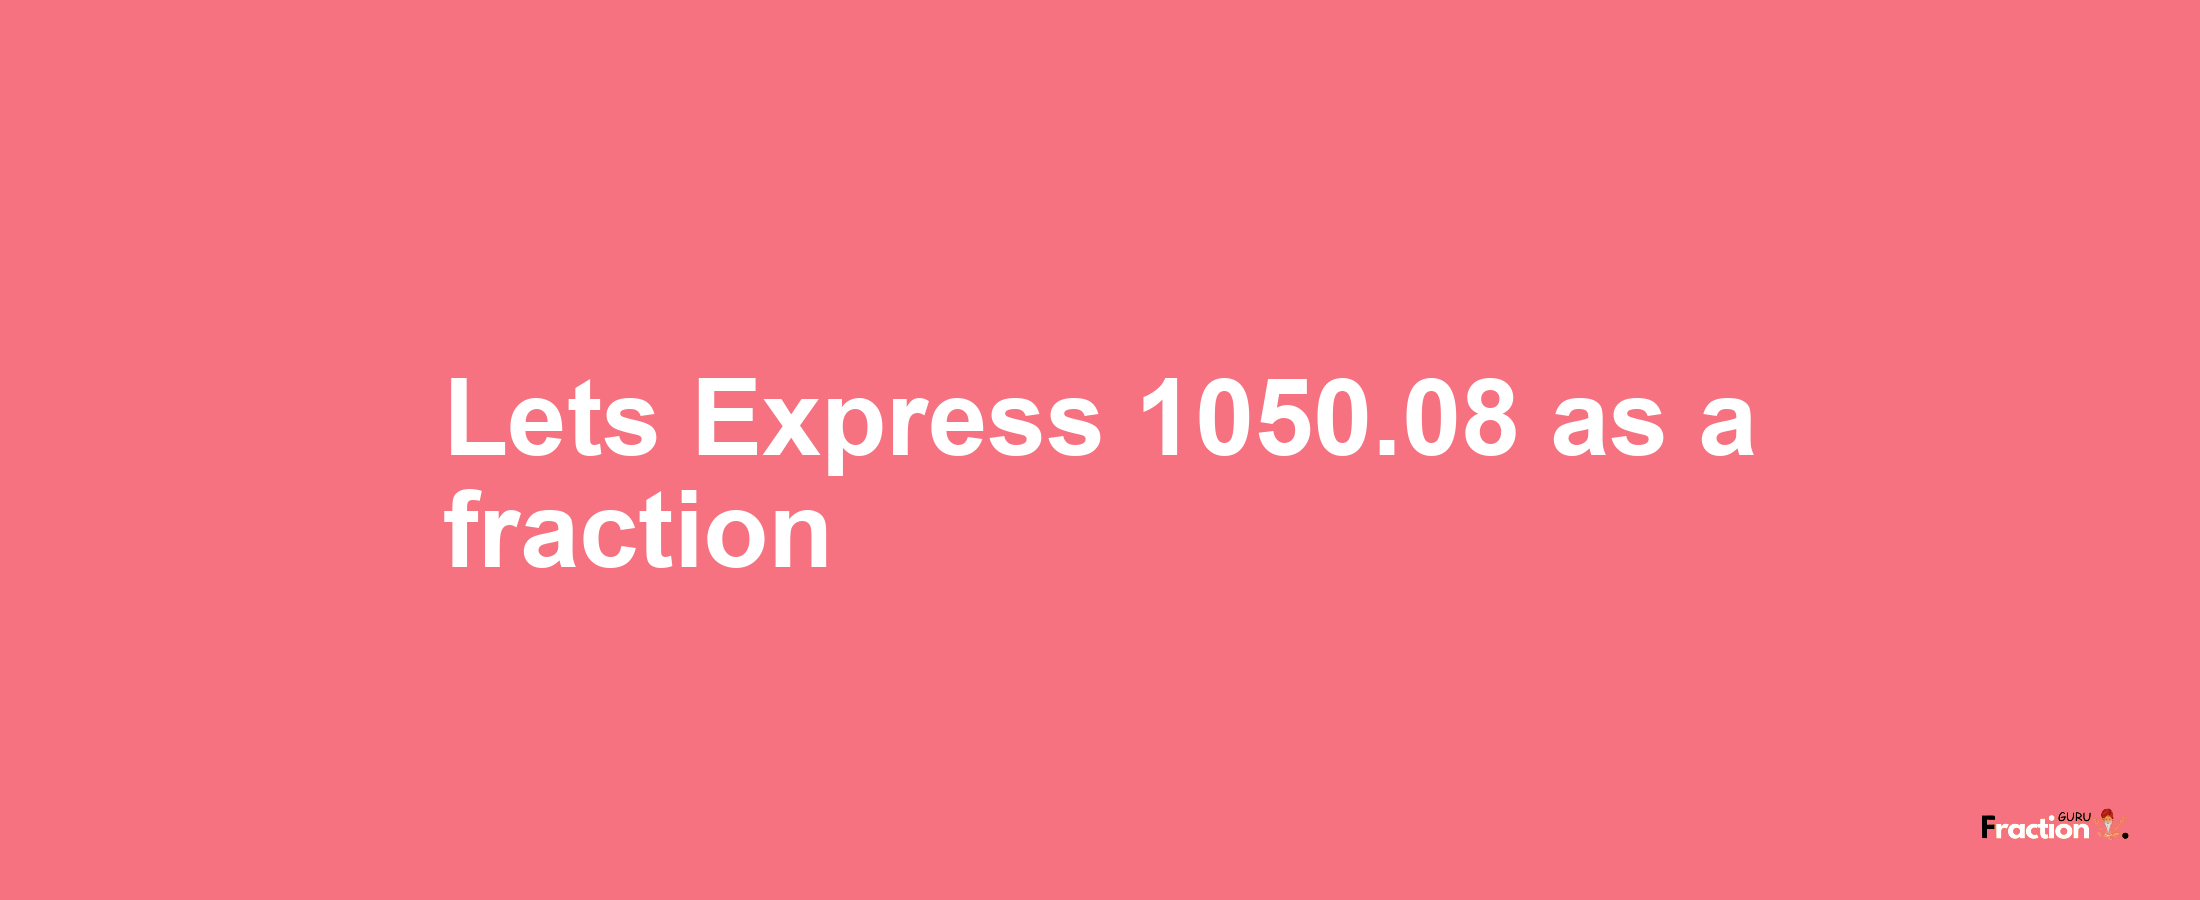 Lets Express 1050.08 as afraction